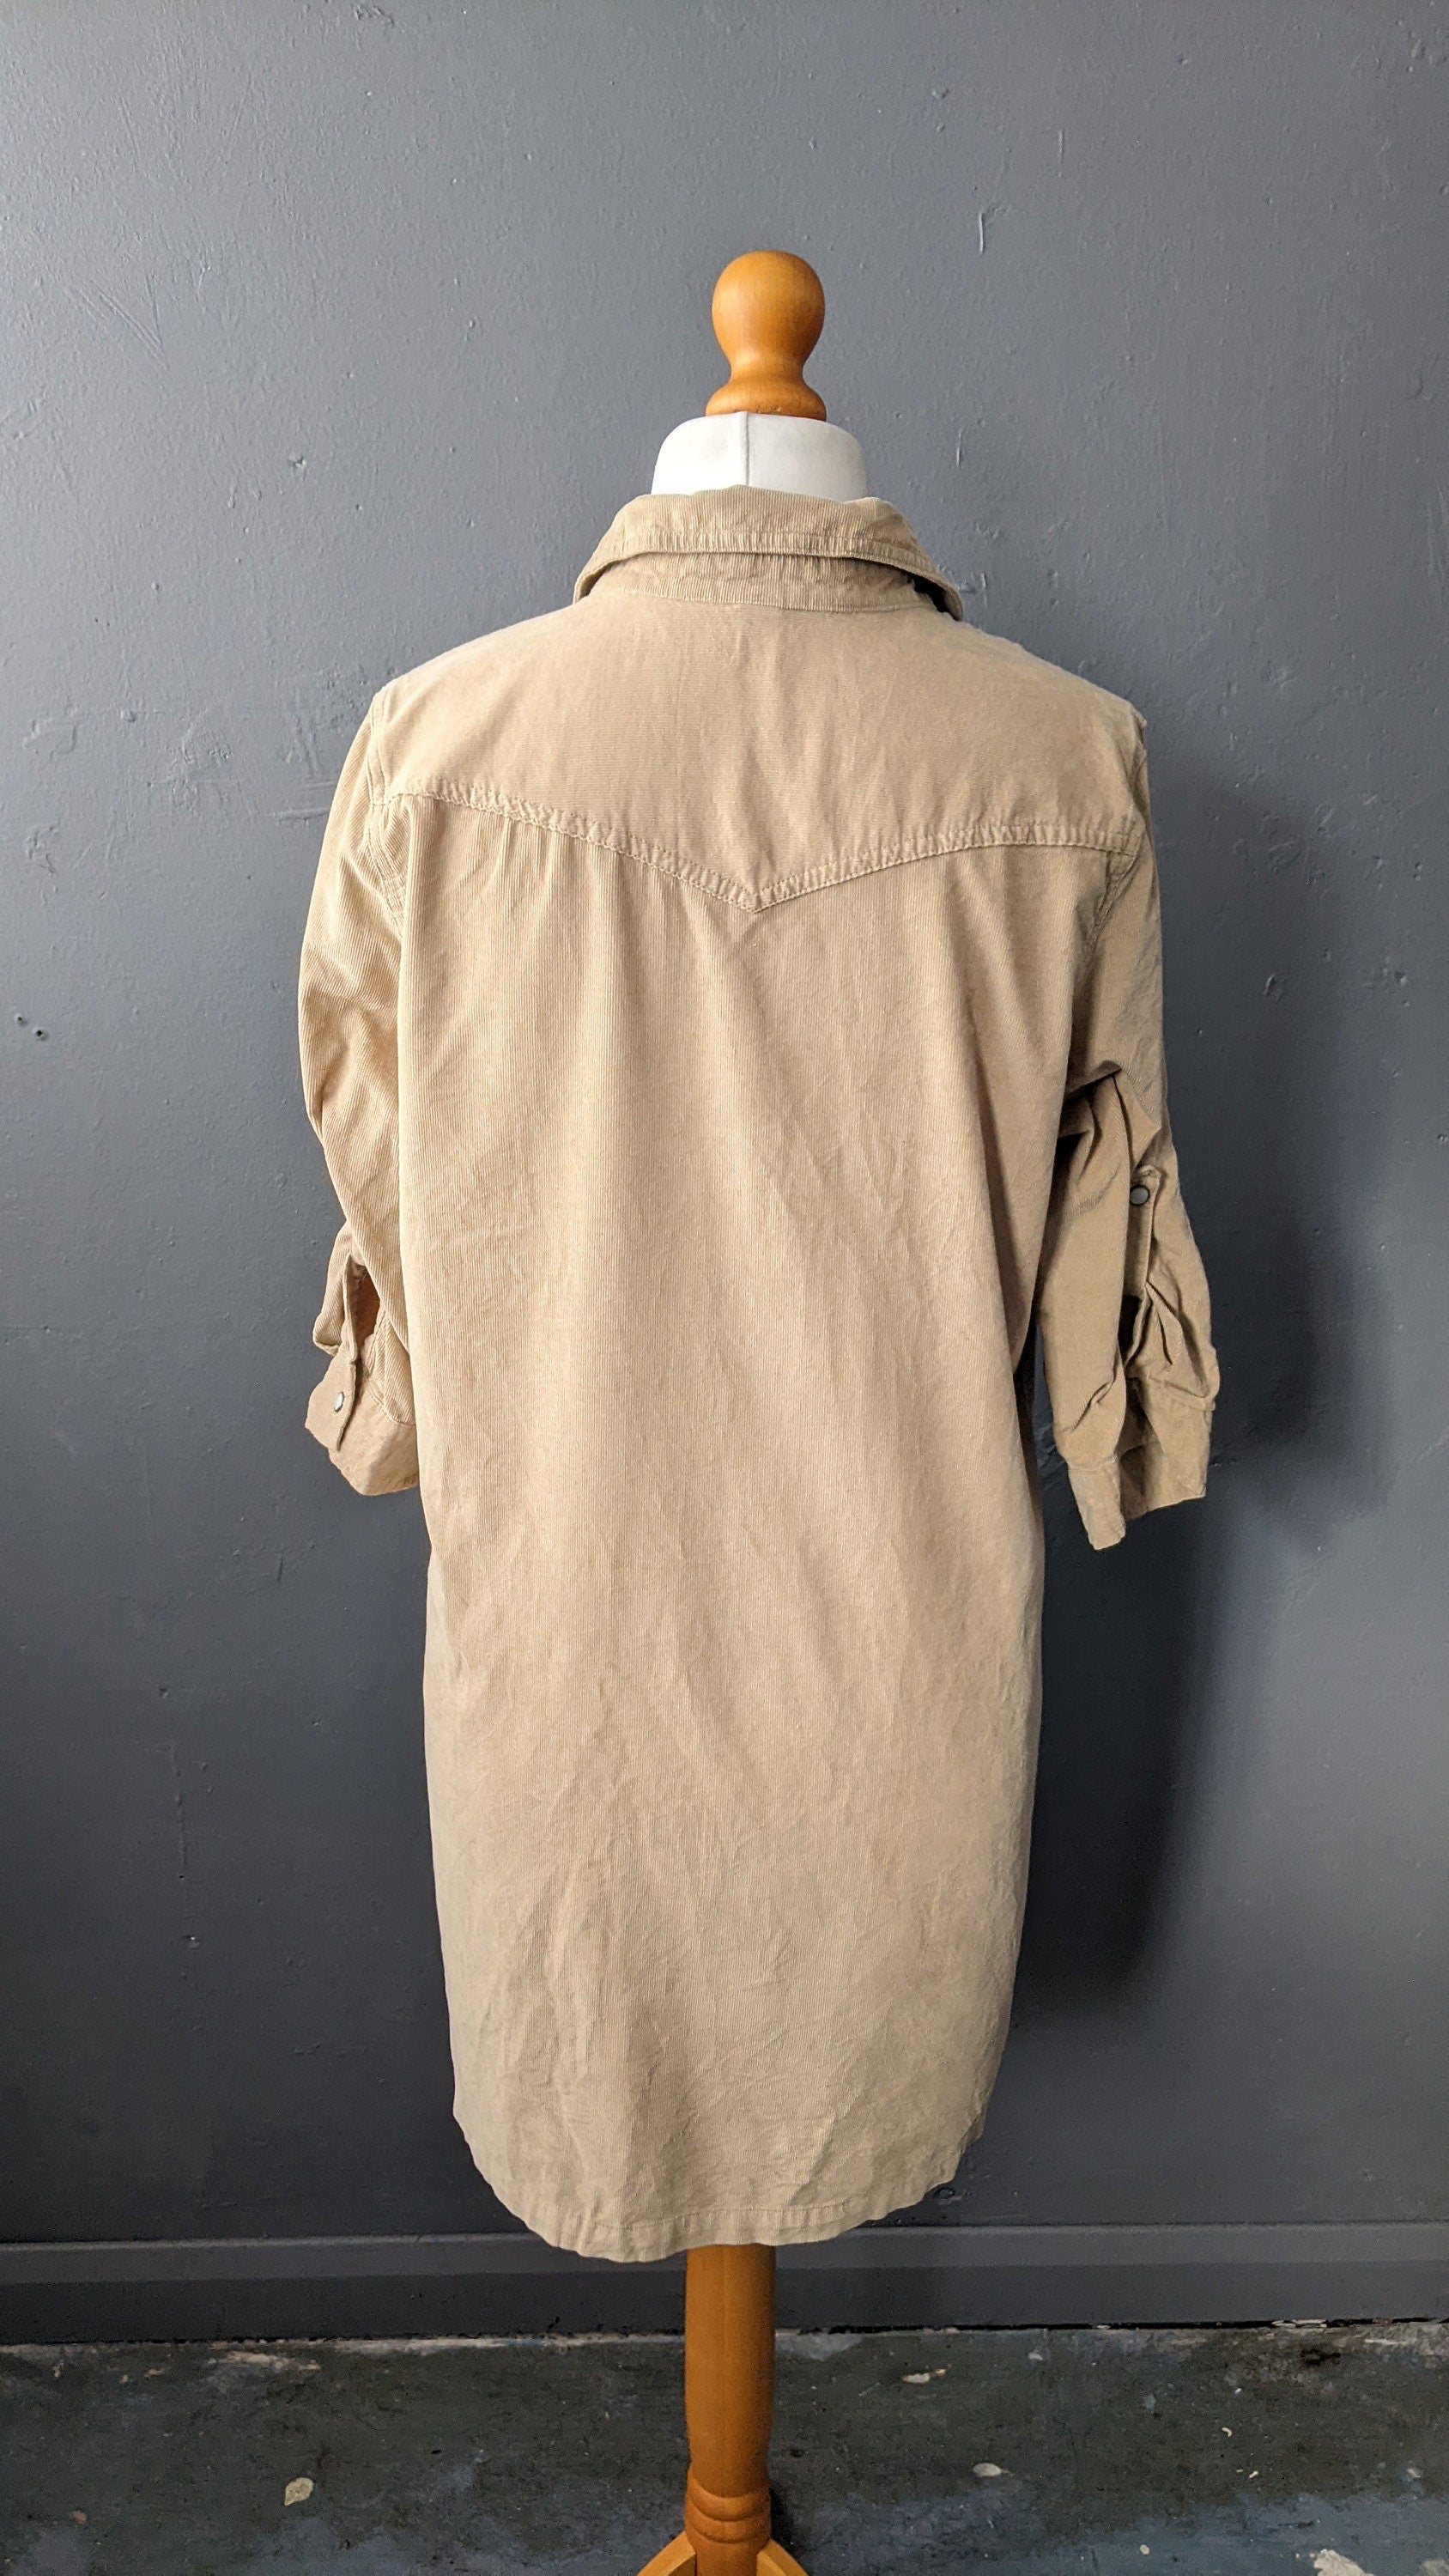 90s Corduroy Shirt Dress by Old Navy, Mid Thigh Length Minidress, Size Large